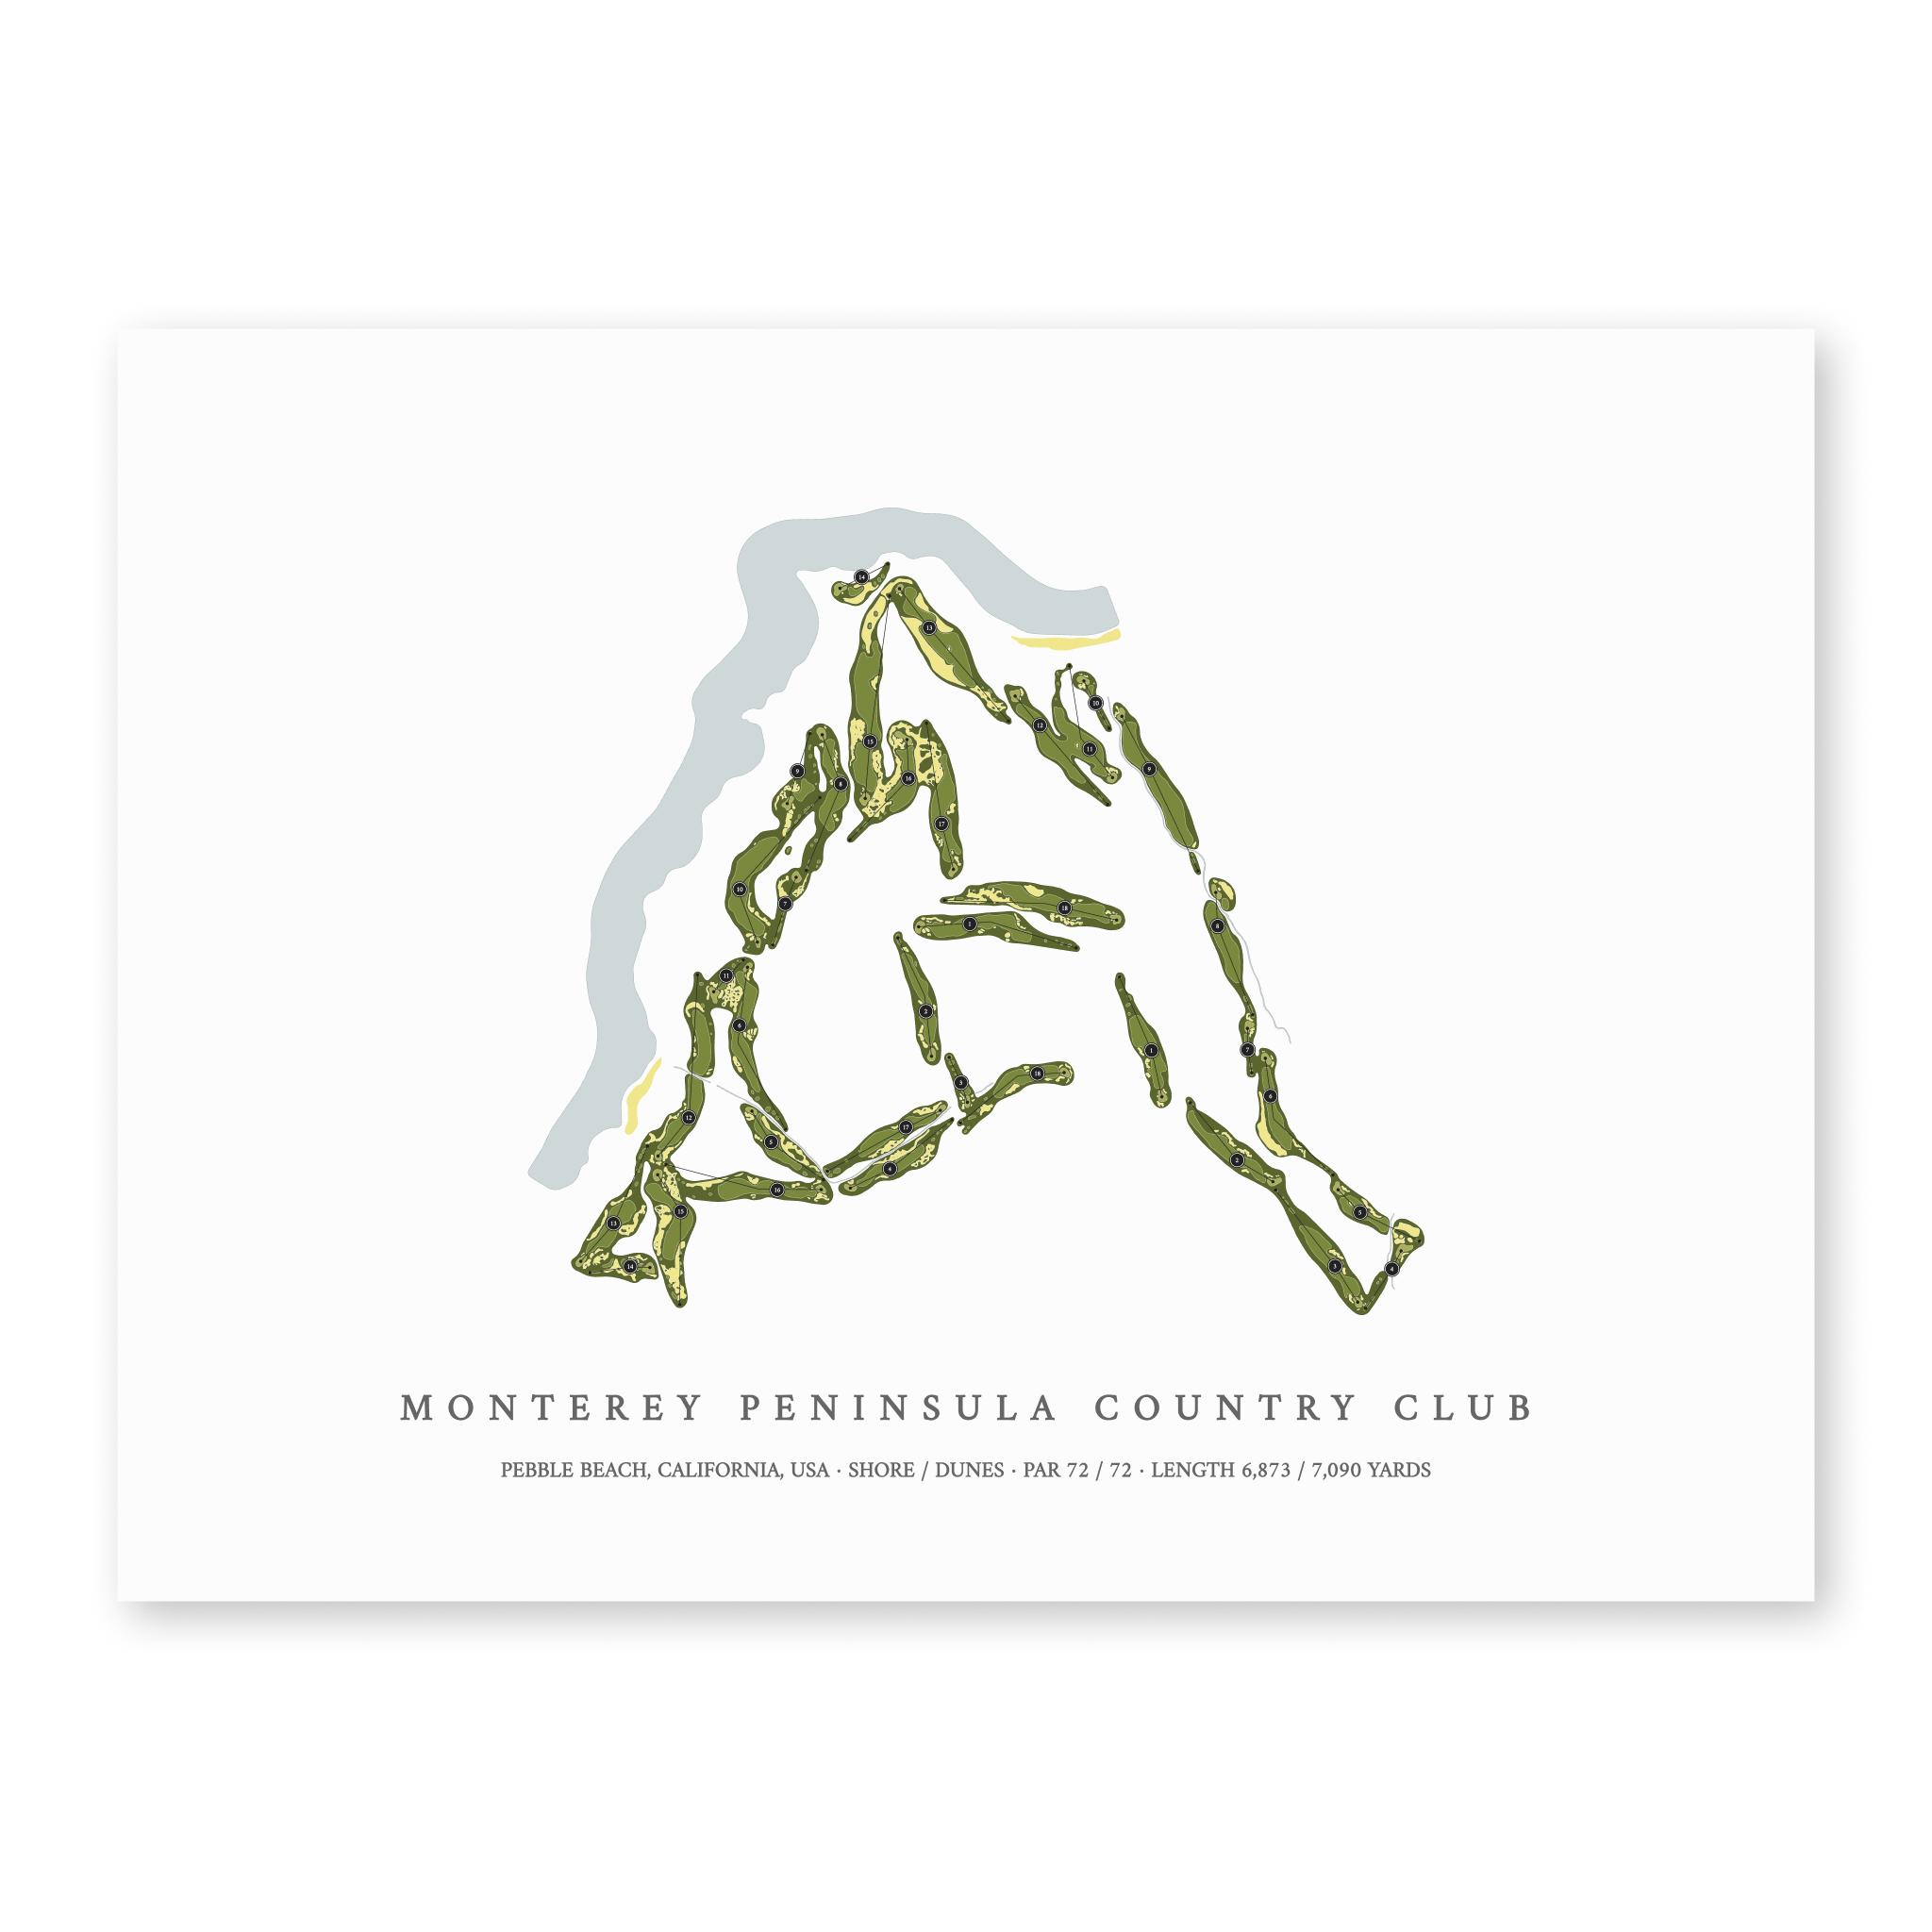 Monterey Peninsula Country Club | Golf Course Map | Unframed